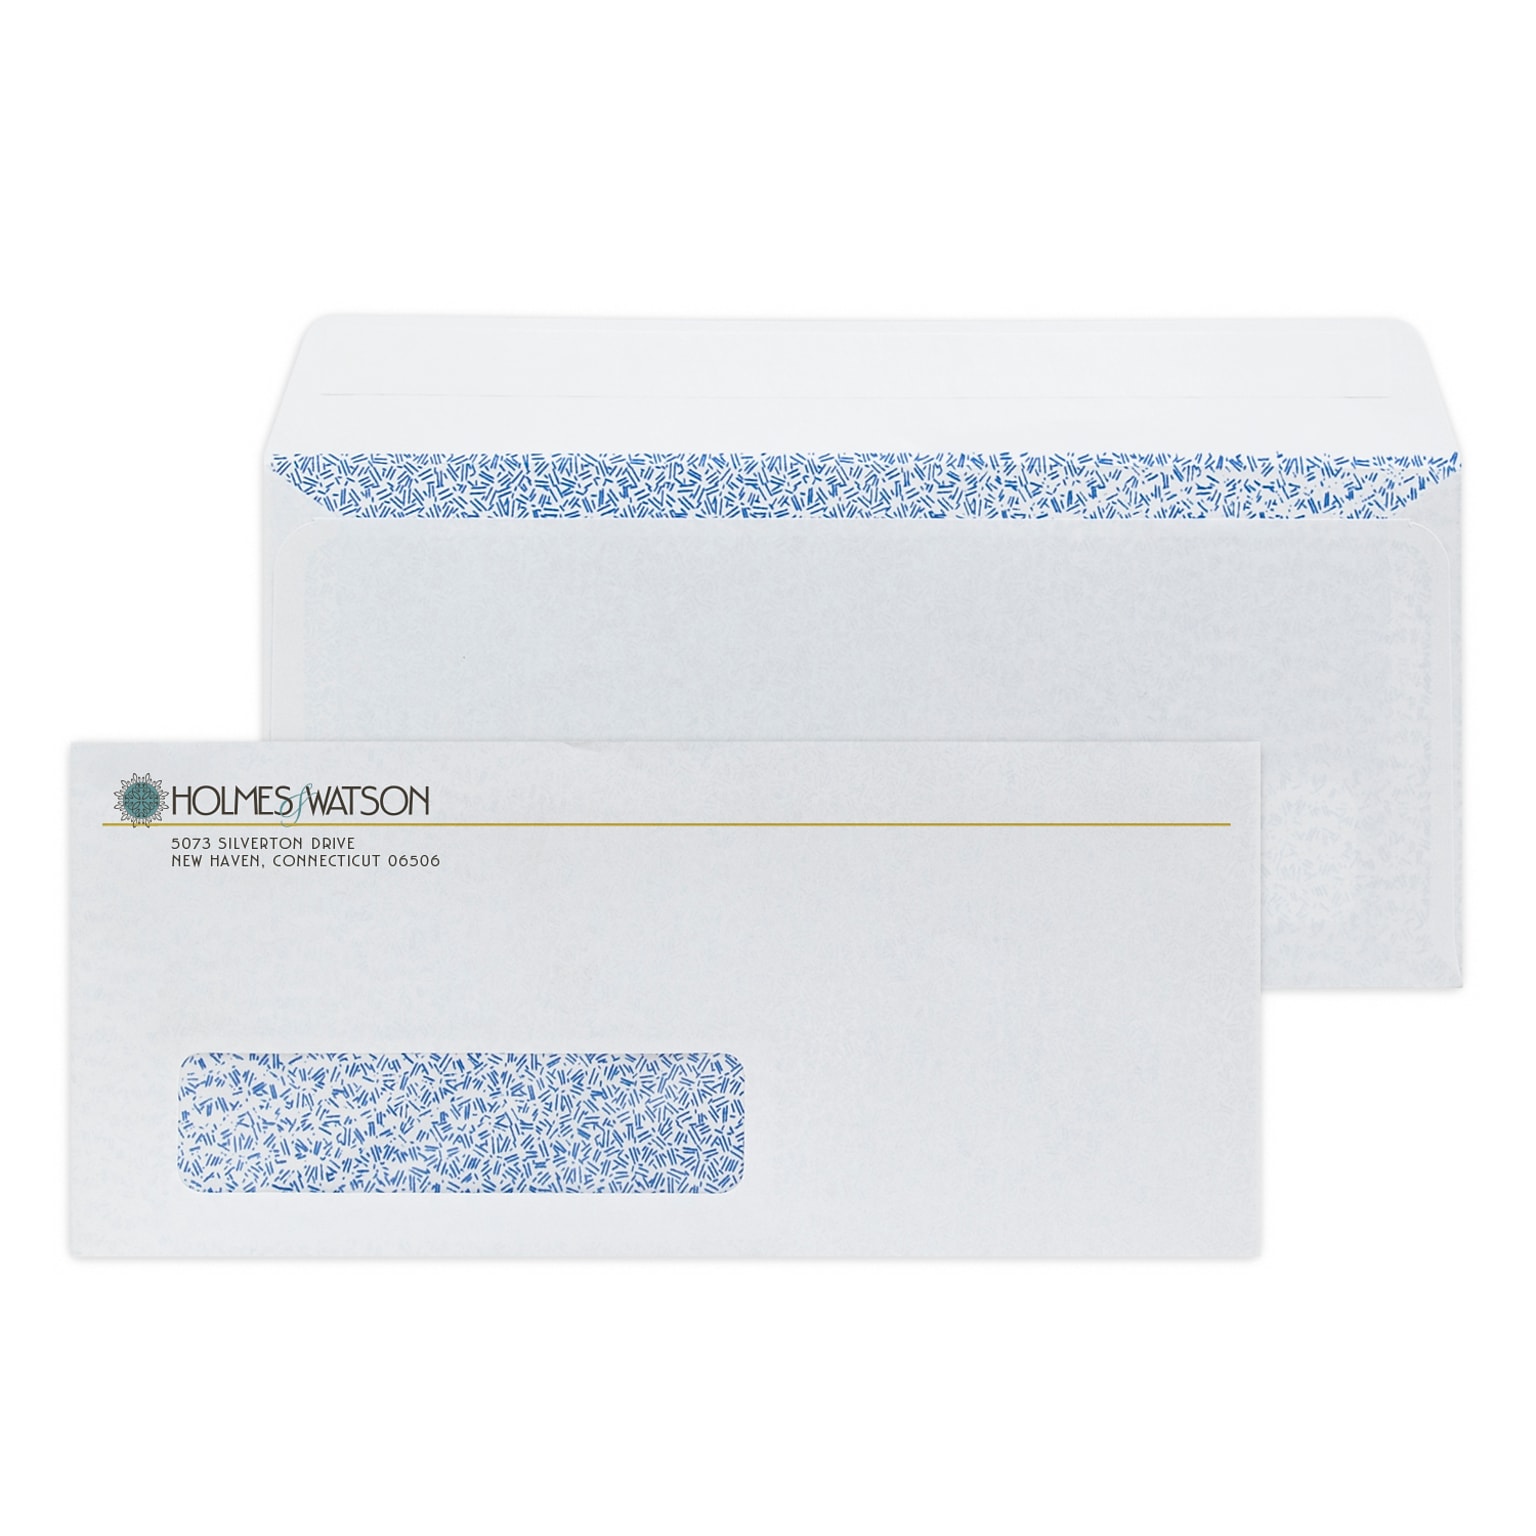 Custom Full Color #10 Peel and Seal Window Envelopes with Security Tint, 4 1/4 x 9 1/2, 24# White Wove, 250 / Pack